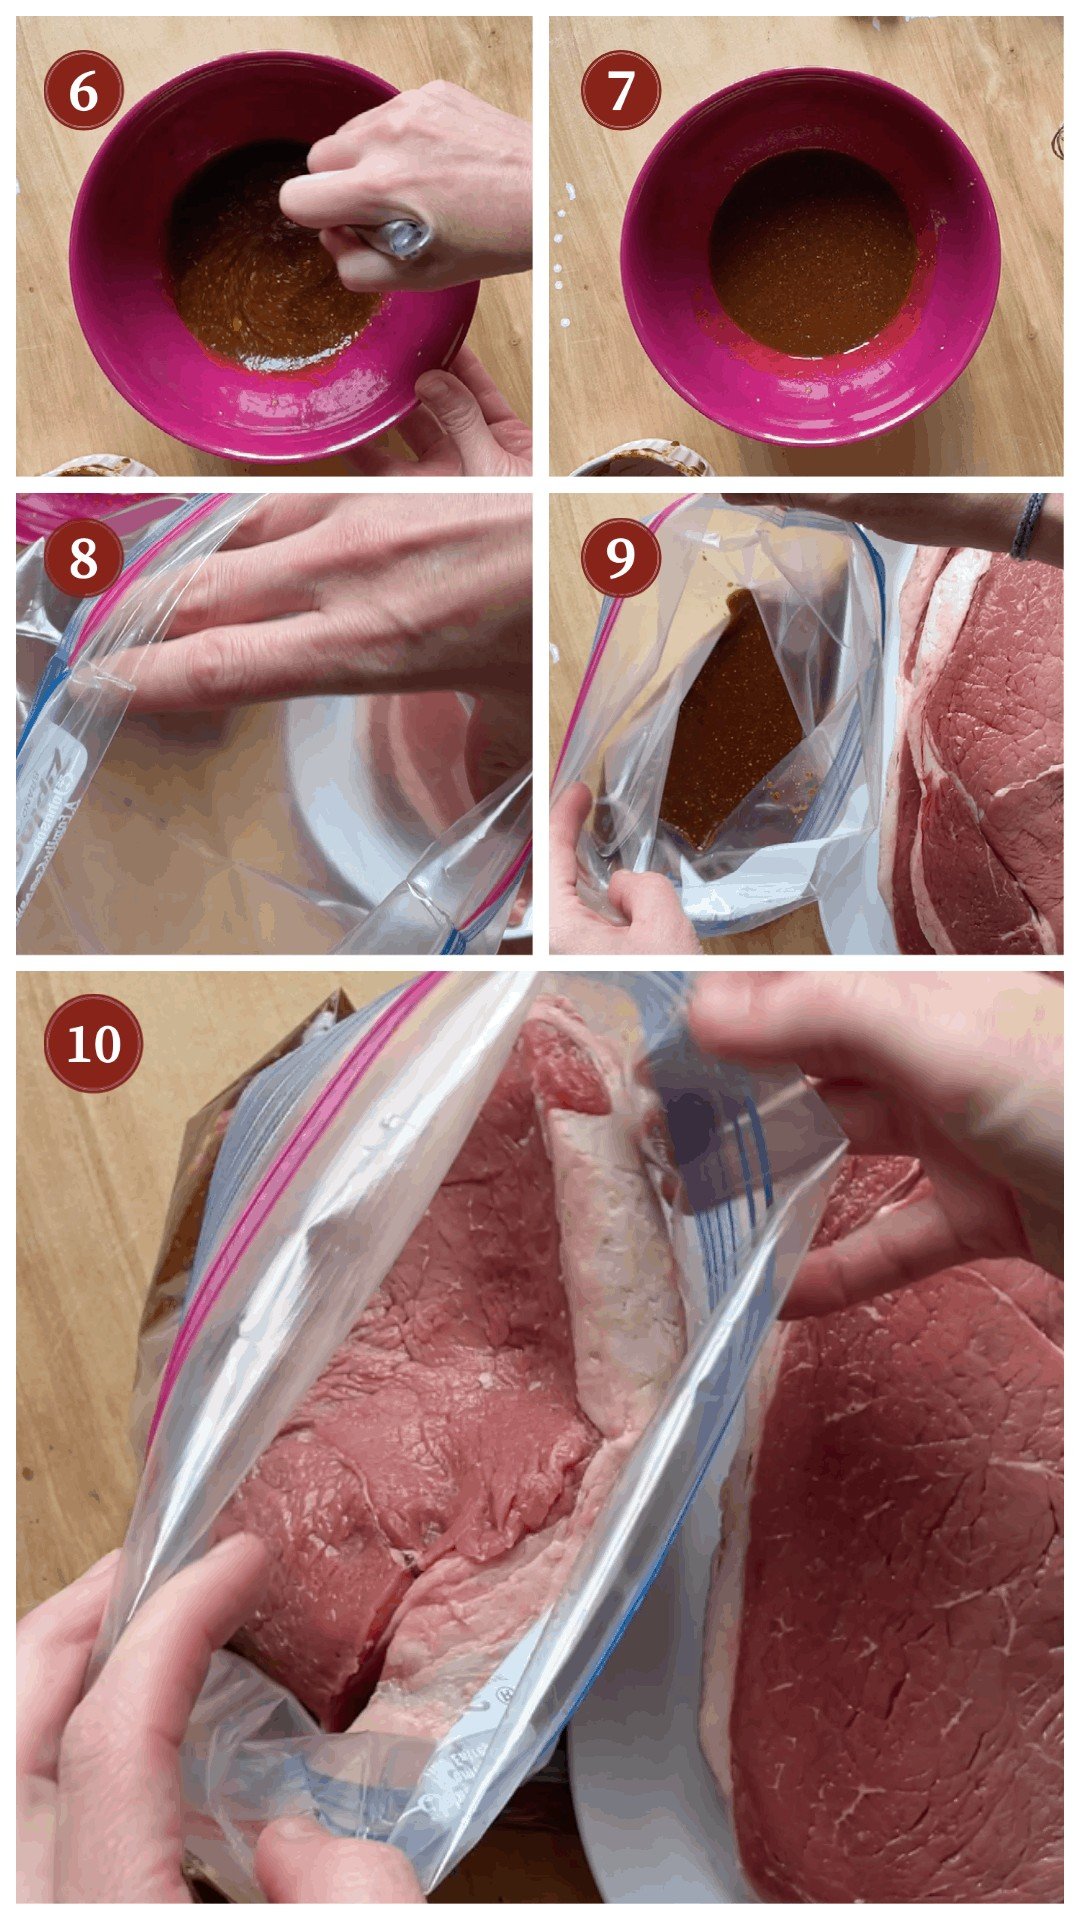 A collage of images showing how to make bourbon street steak, steps 6 - 10.